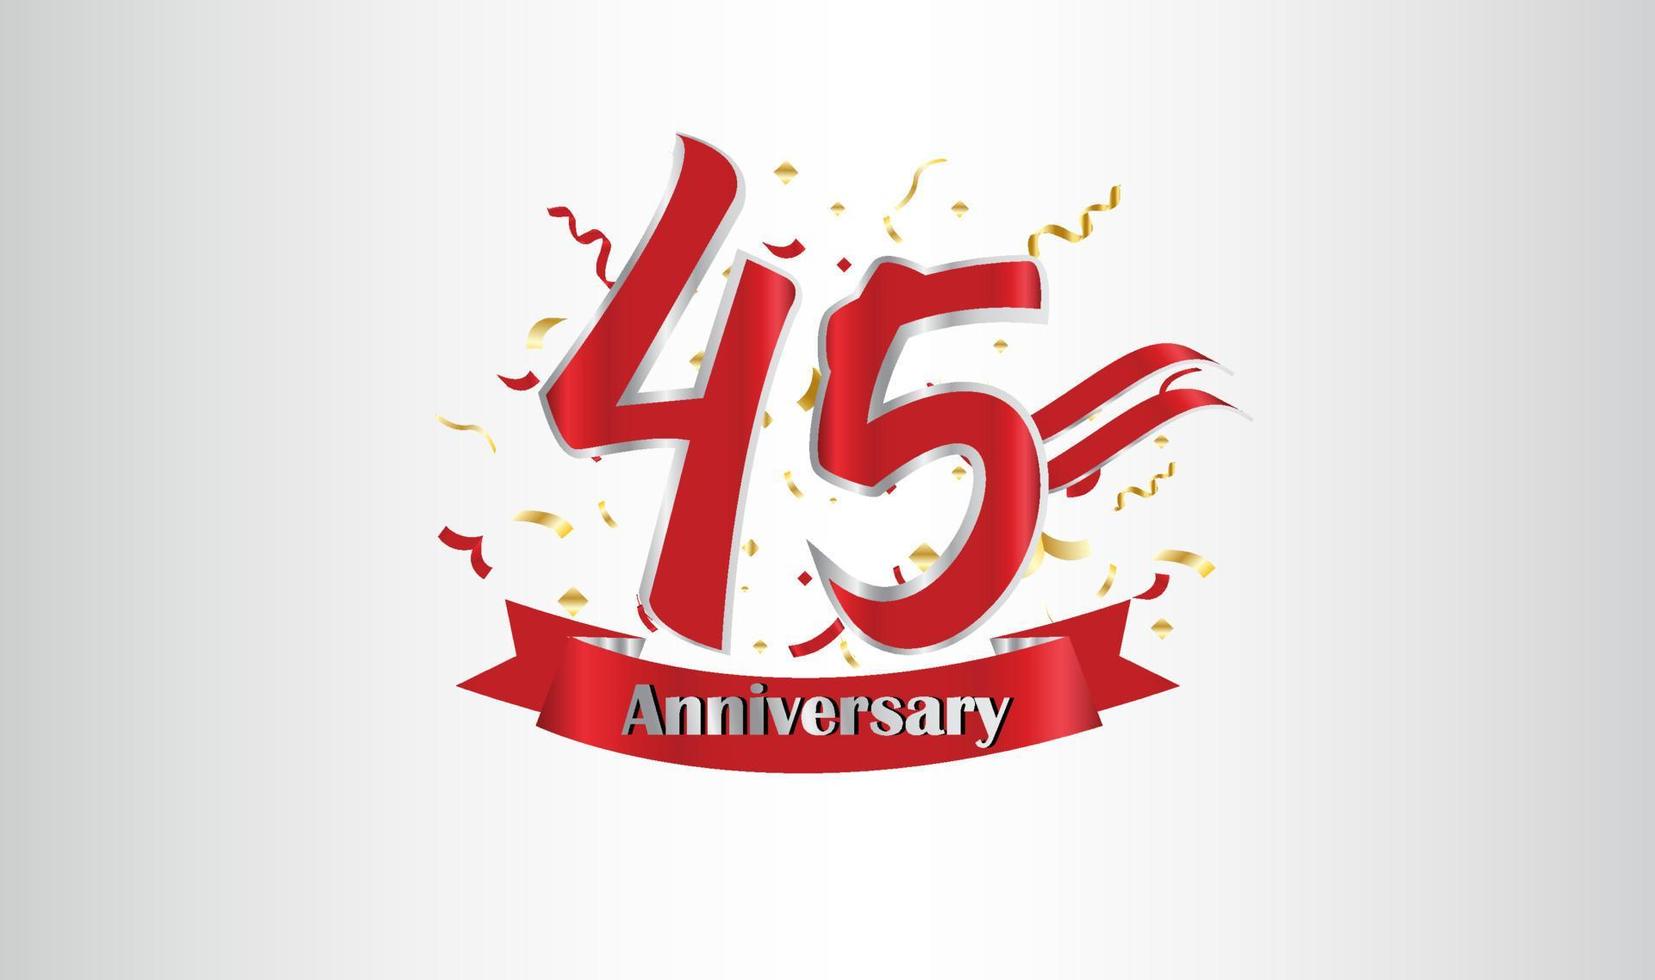 Anniversary celebration background. with the 45th number in gold and with the words golden anniversary celebration. vector